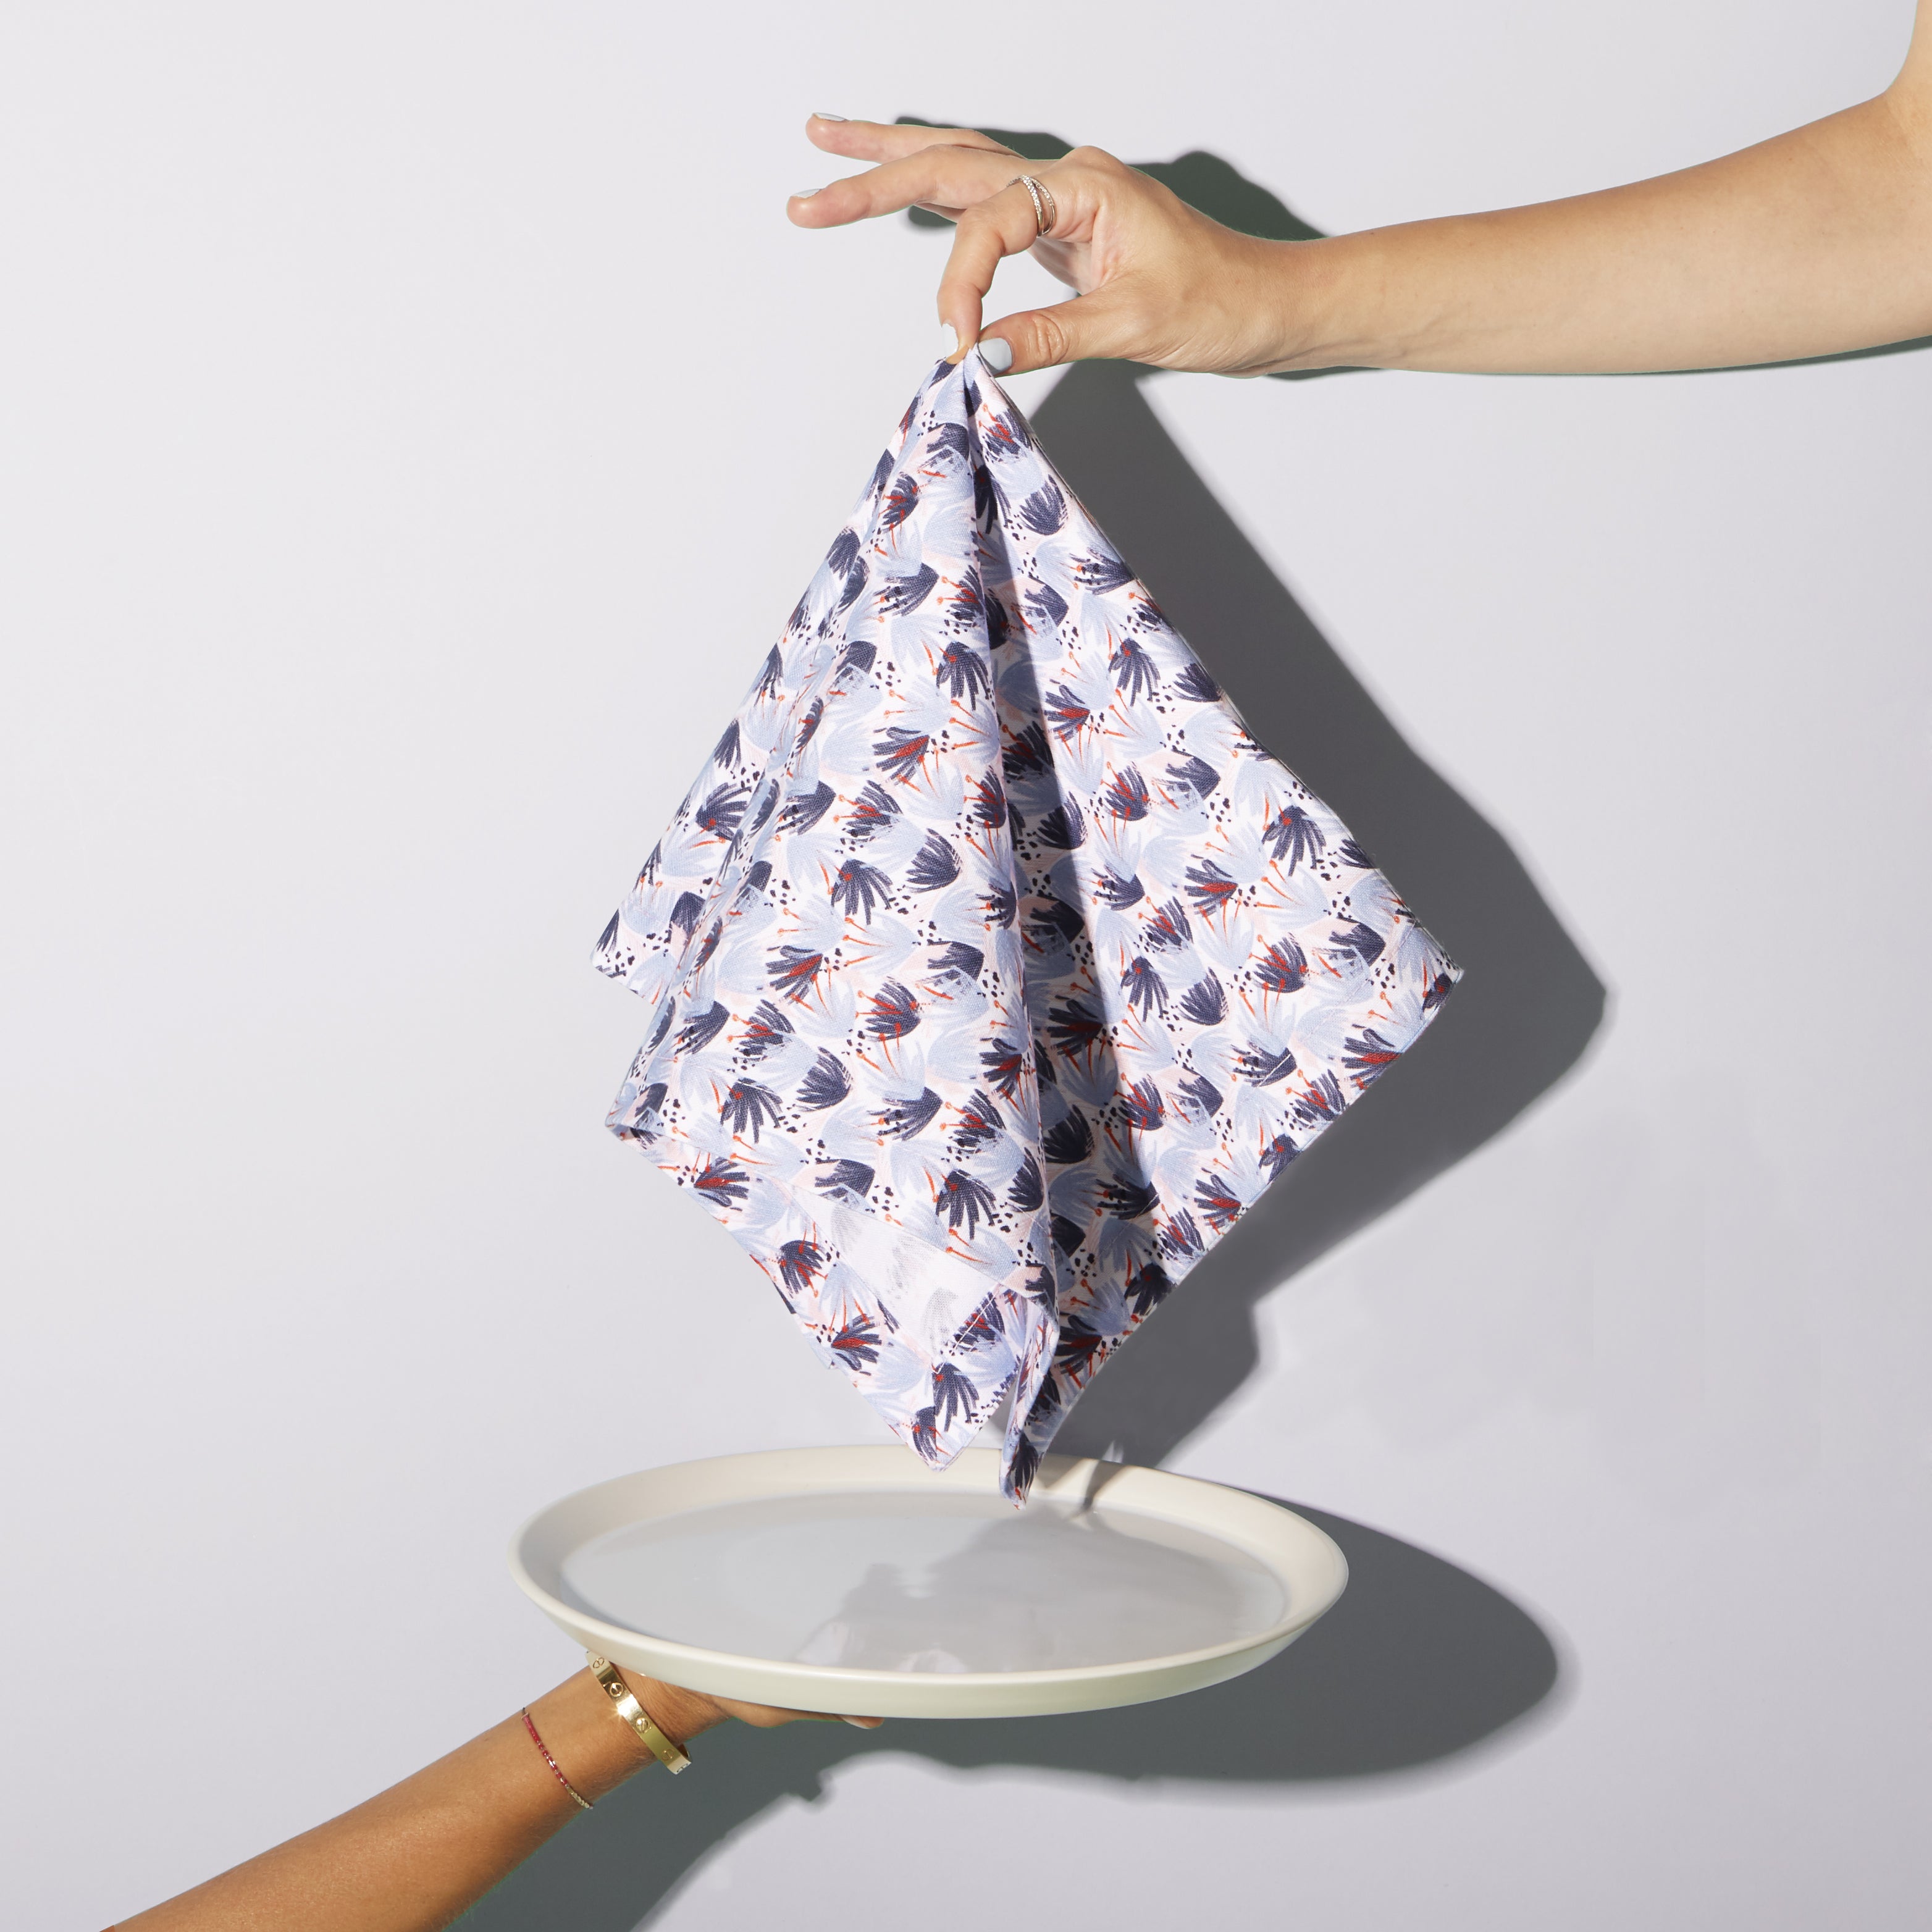 Red and Blue Printed Napkin being held by hand on top of another hand holding white plate